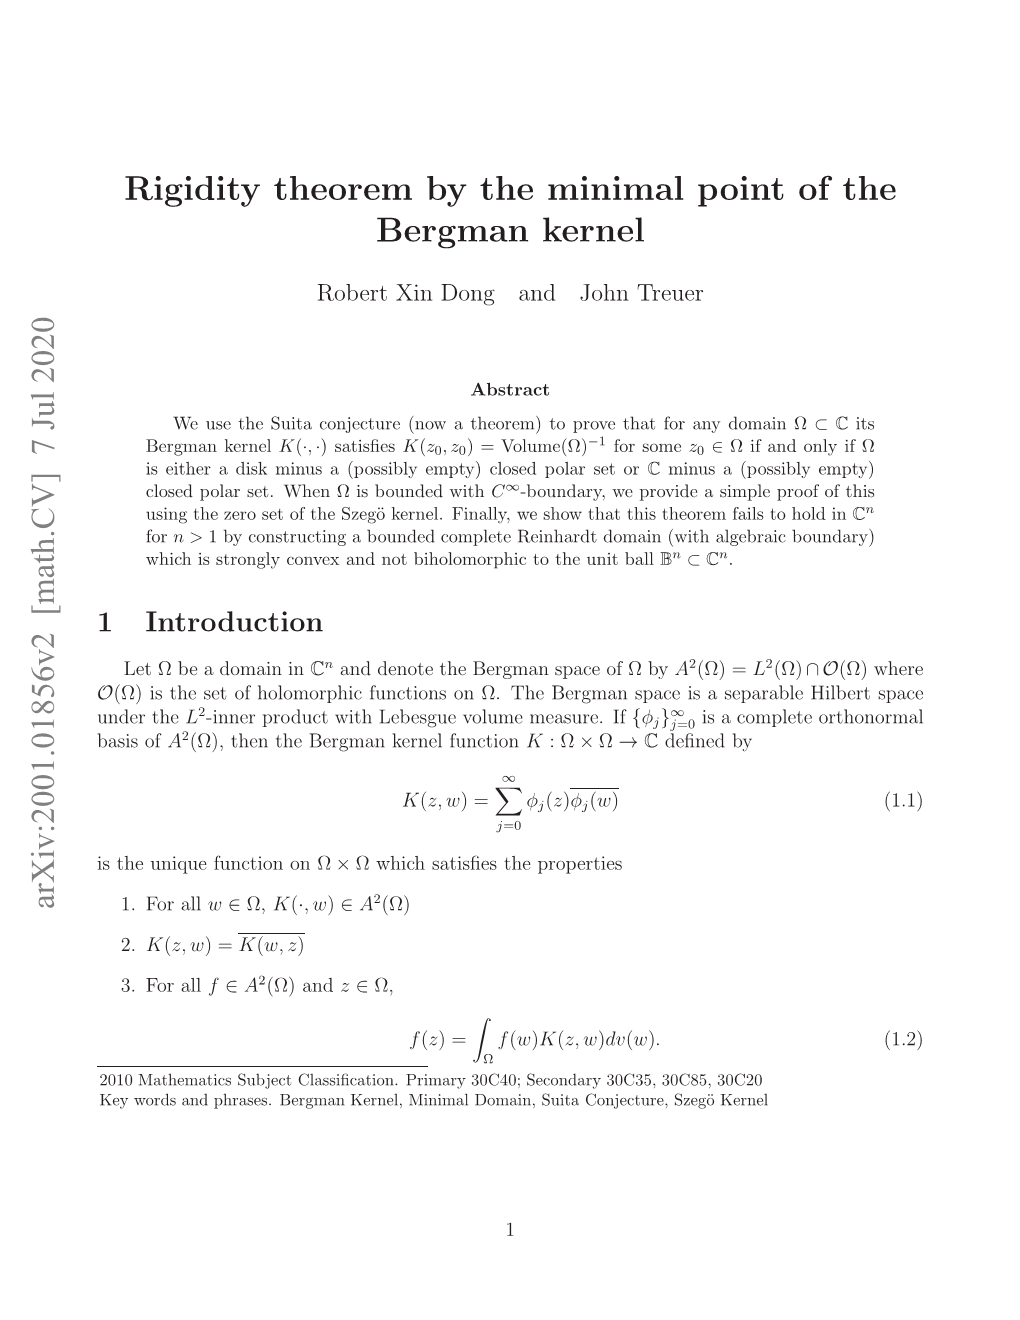 Rigidity Theorem by the Minimal Point of the Bergman Kernel